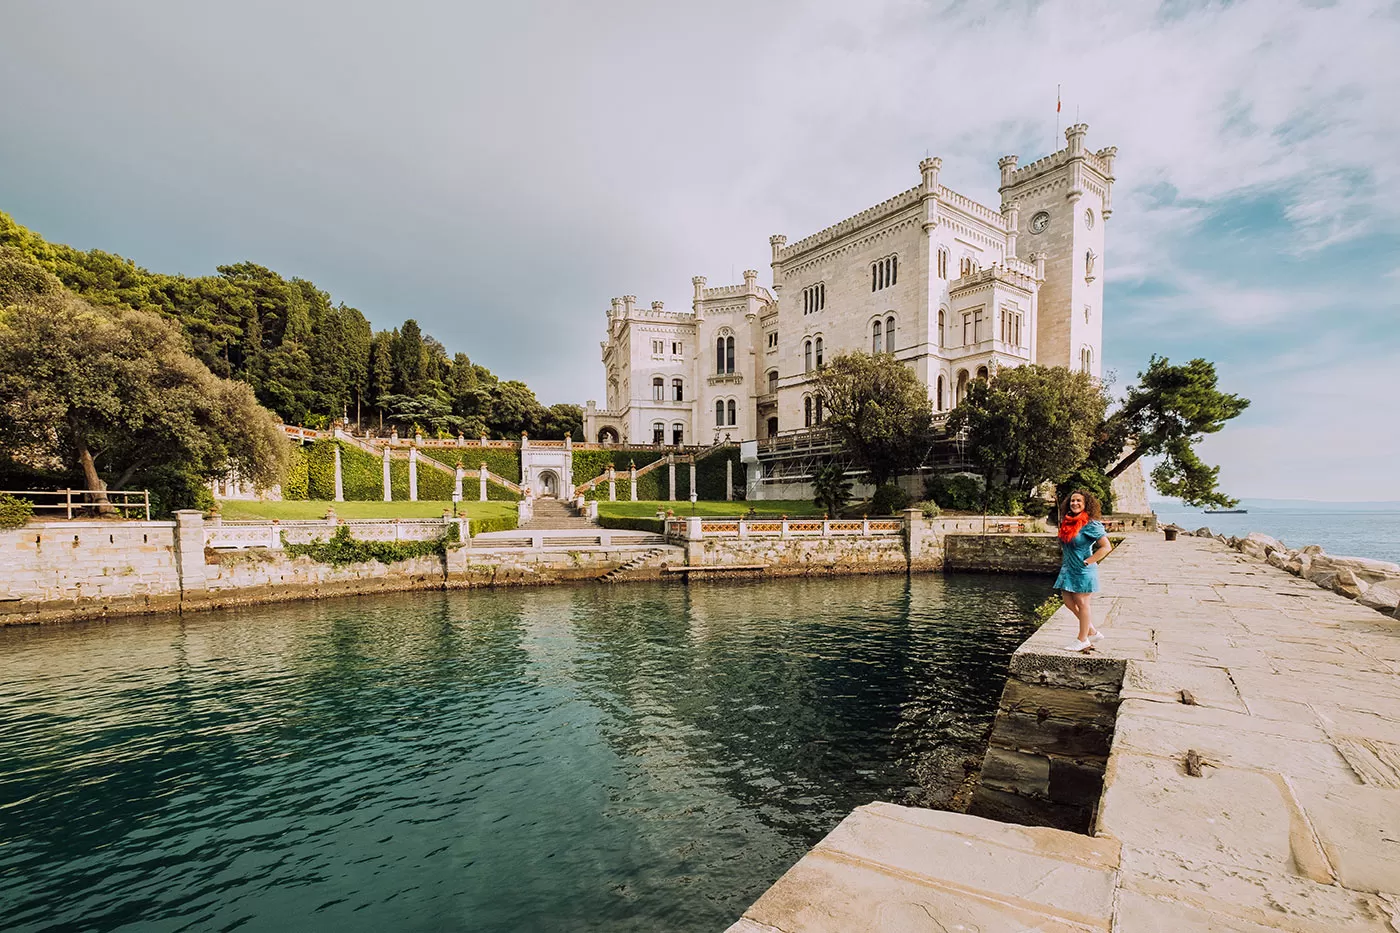 Best Things to Do in Trieste Italy - Miramare Castle on Gulf of Trieste